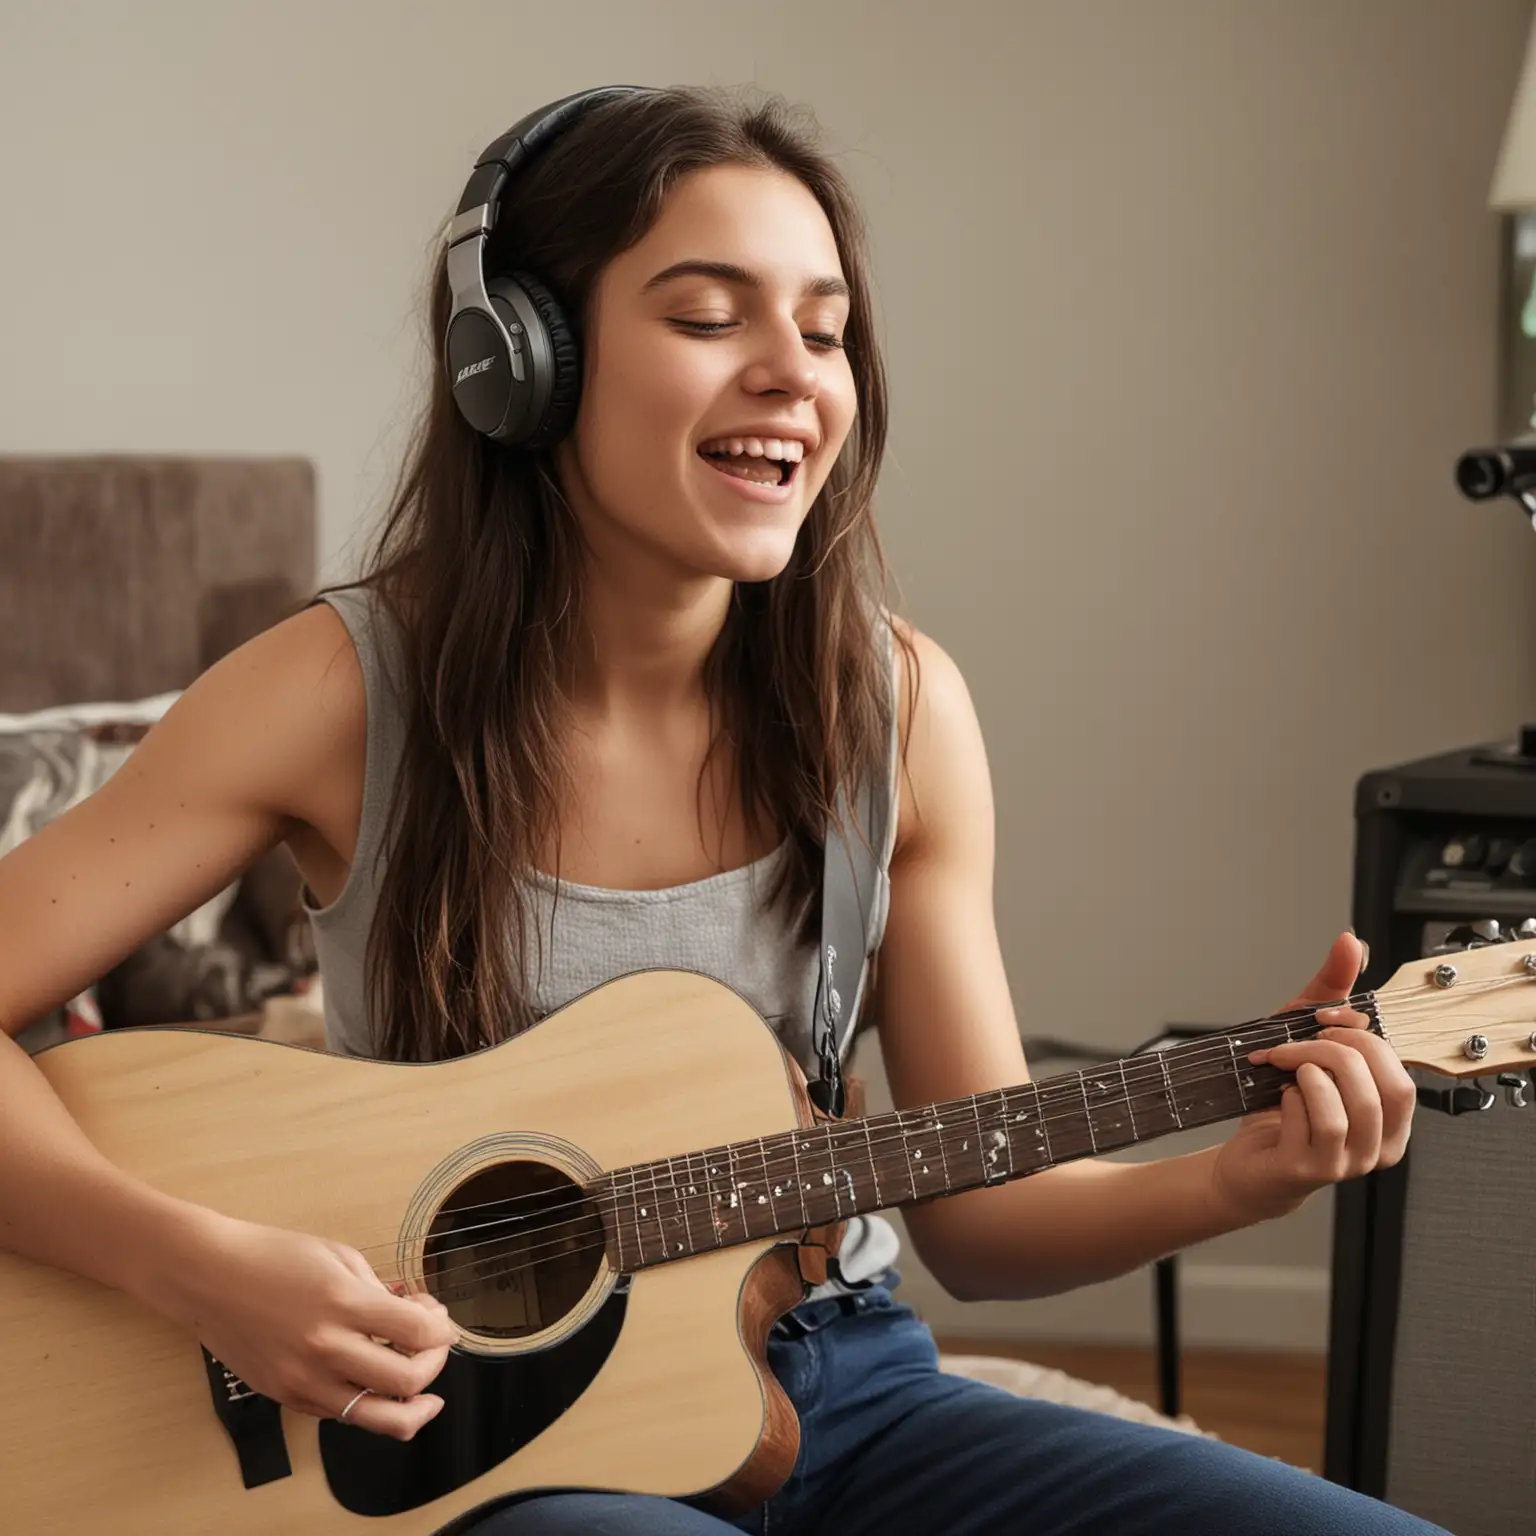 a young woman is on one side playing the guitar, singing into a microphone on the other side, with a Bose Bluetooth speaker next to her